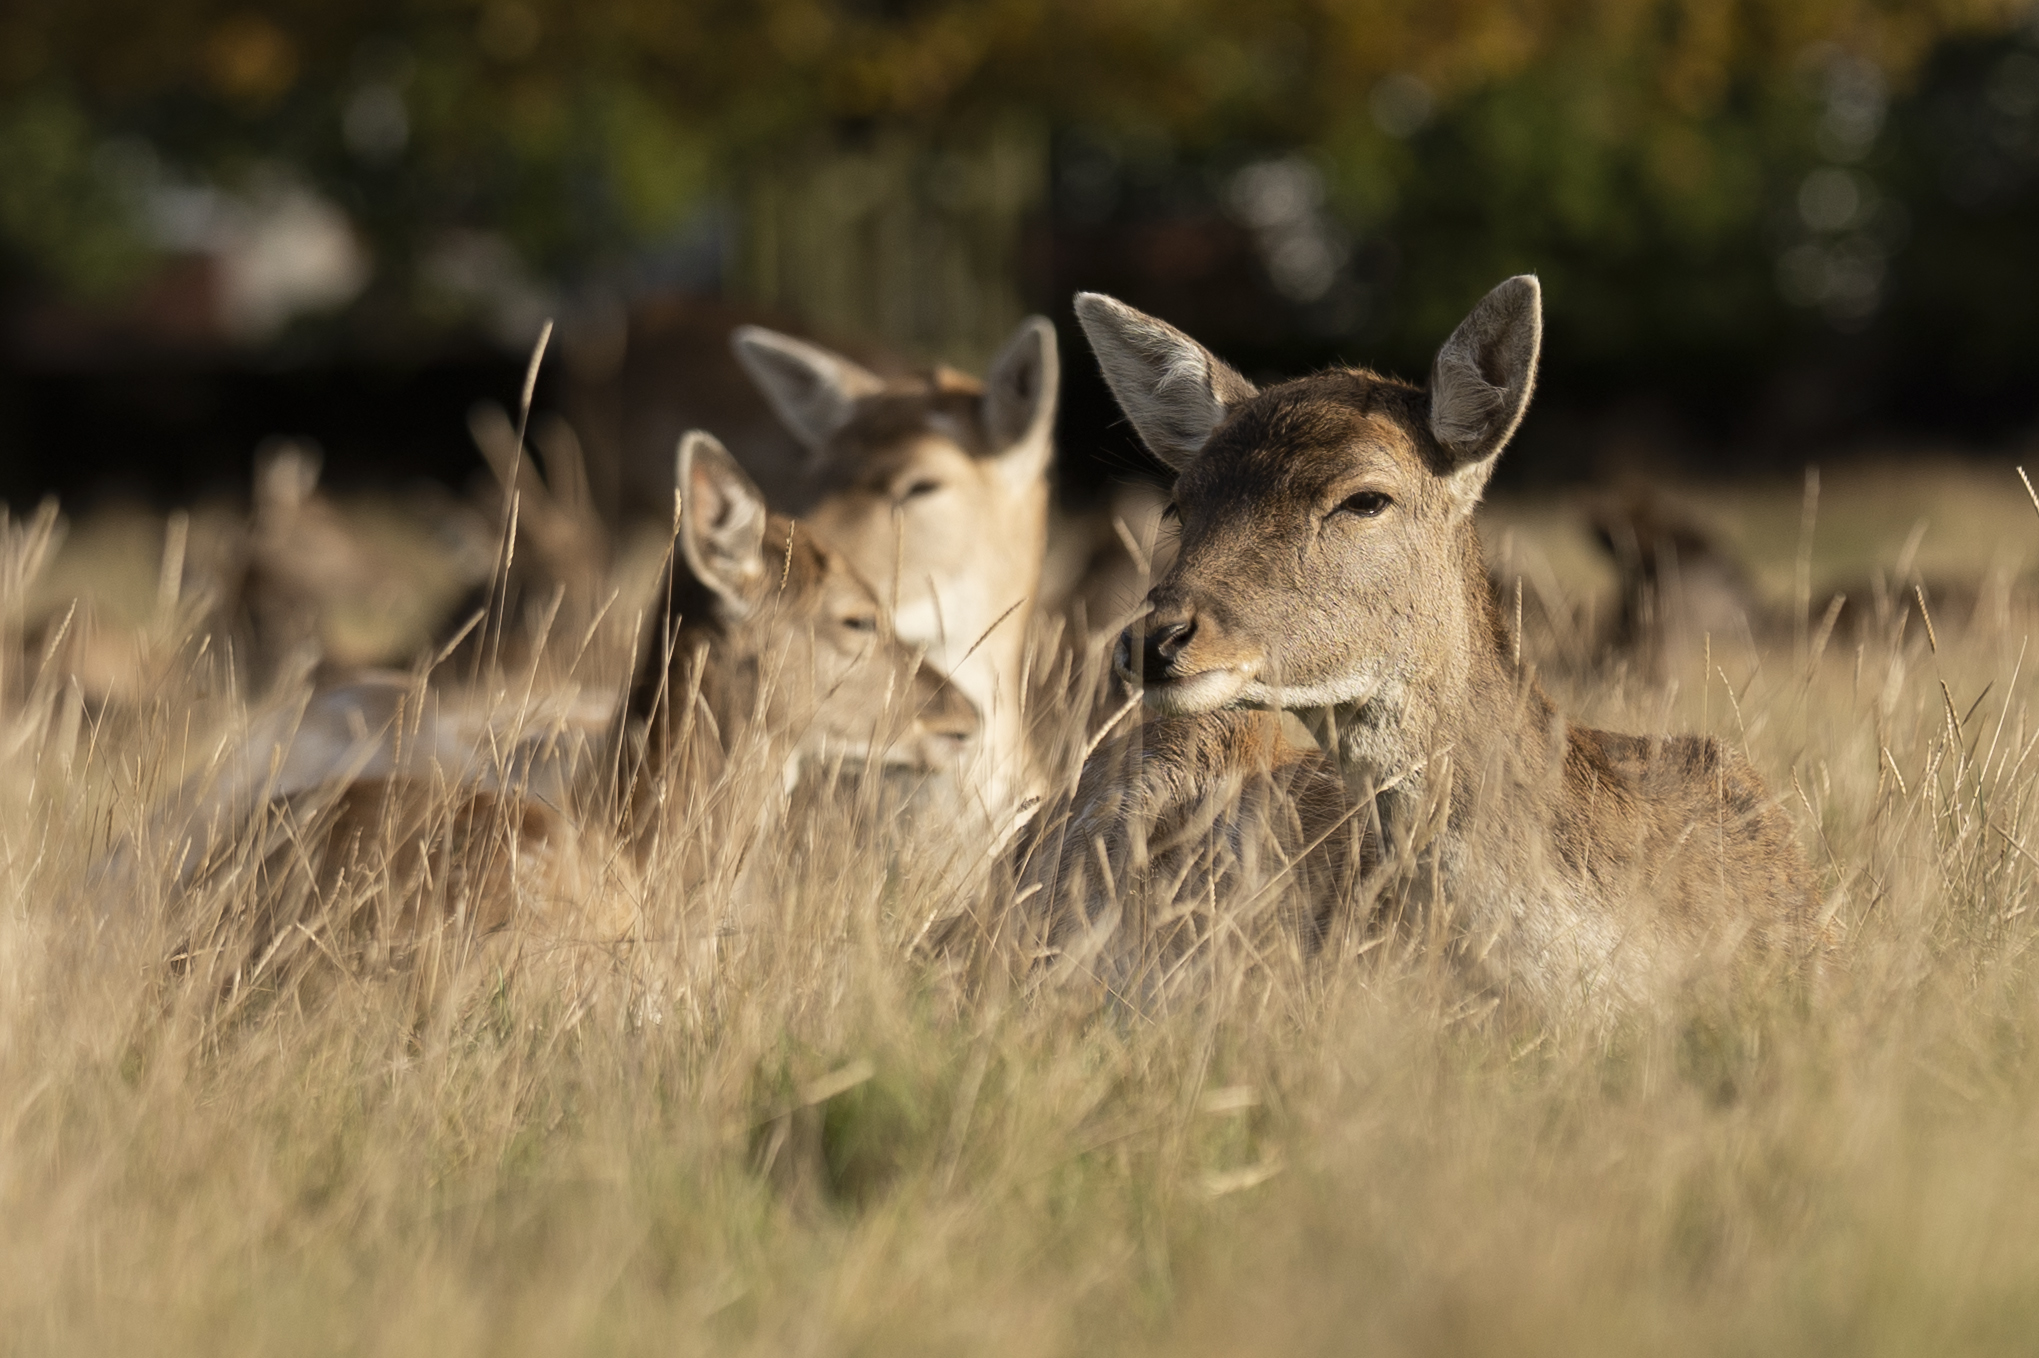 A group of deer shot on the Sony A7 IV camera